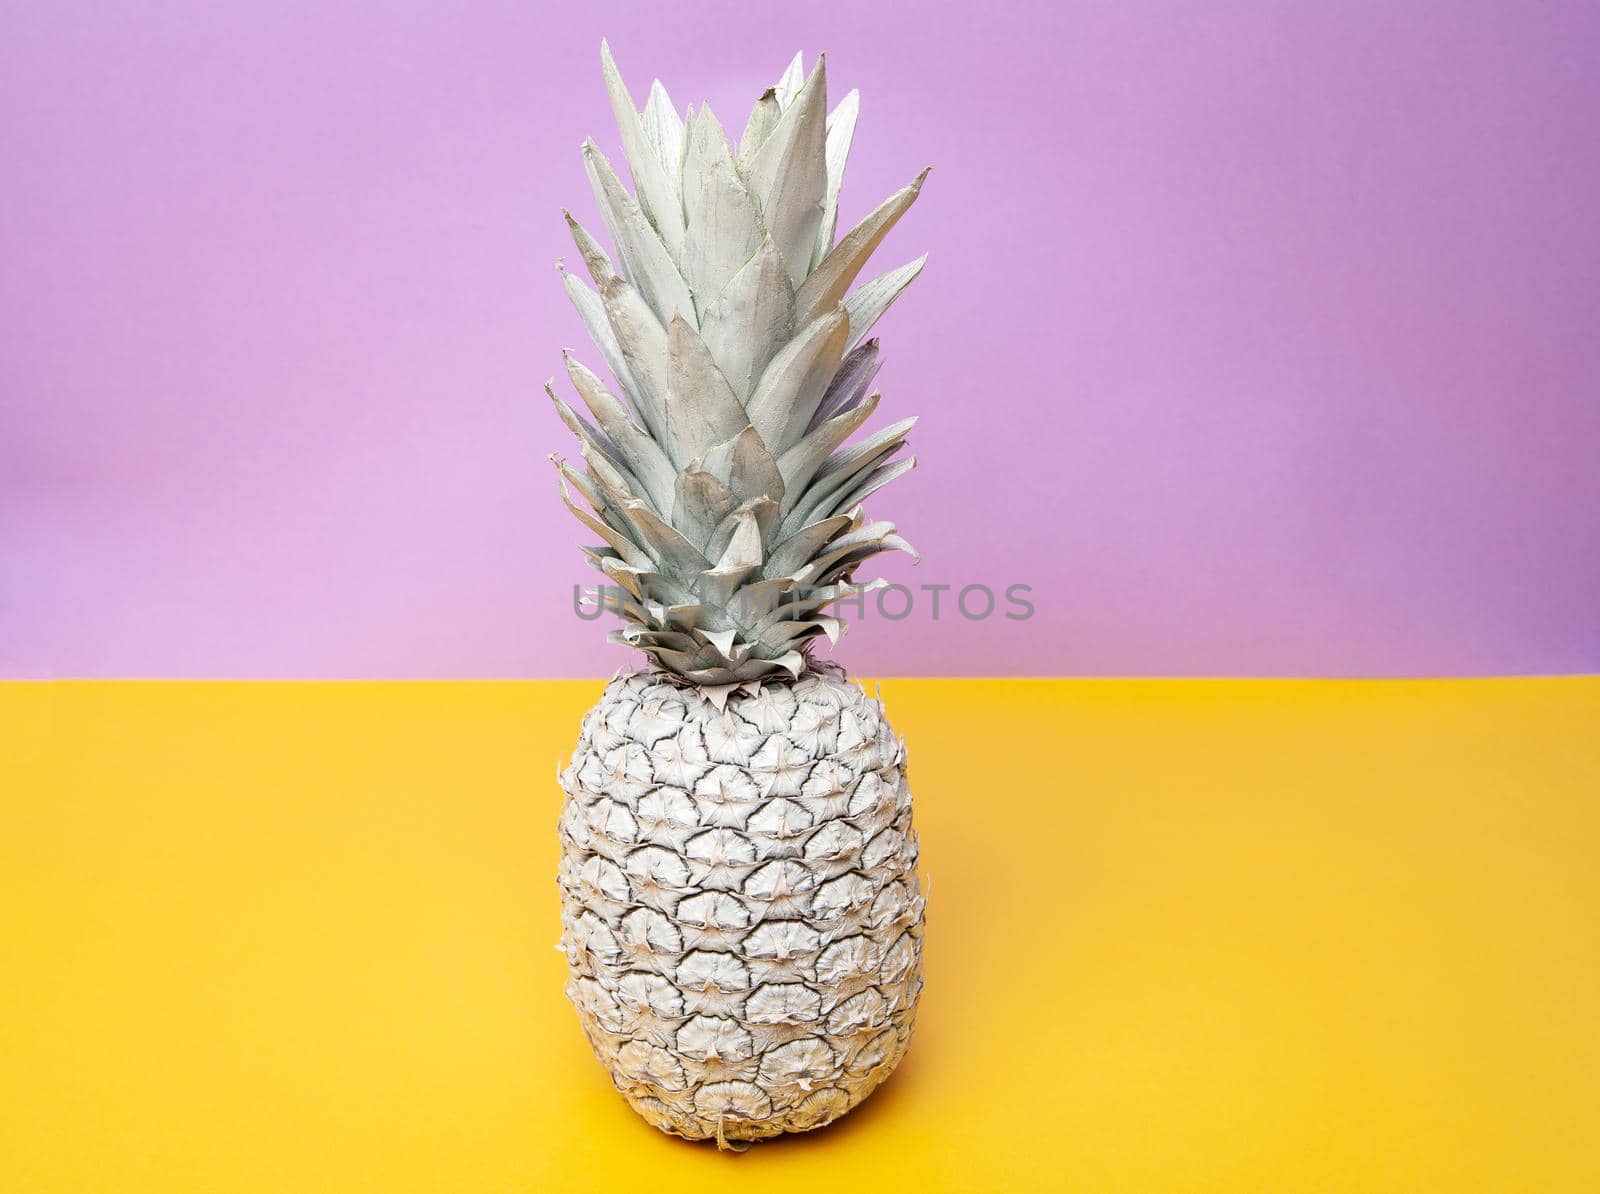 White pineapple on table in studio on violet and yellow background by Julenochek